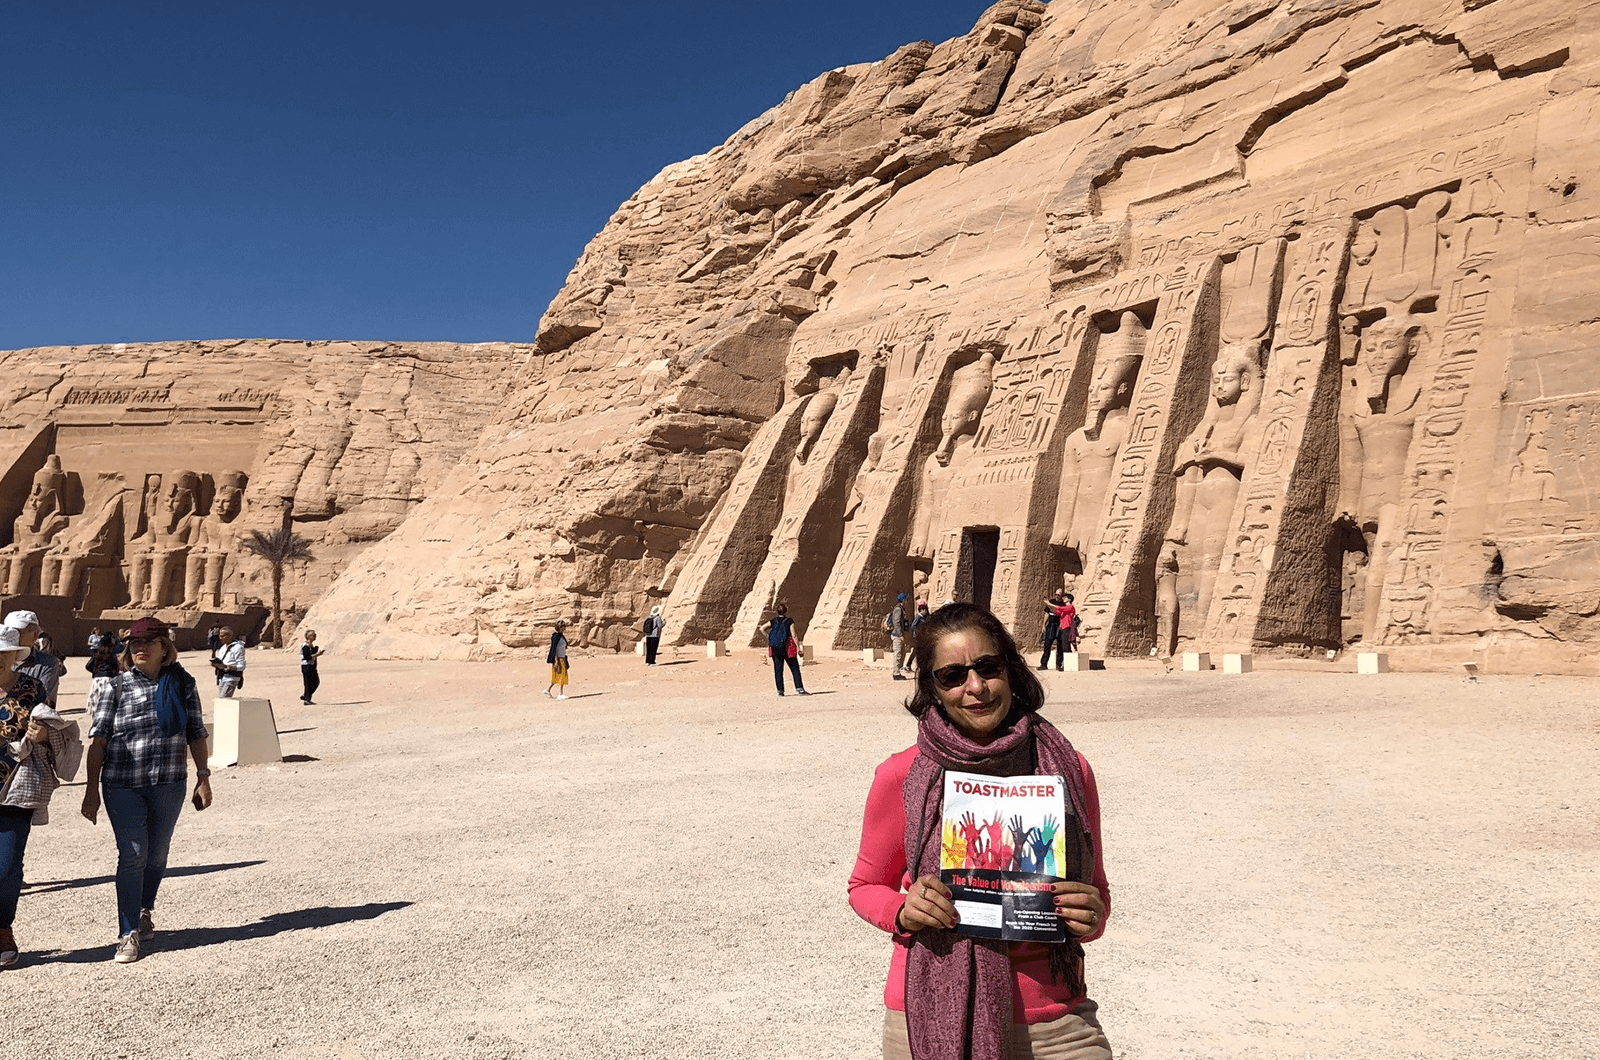 Rovina Suri of Sunnyvale, California, U.S., stands near the twin Abu Simbel temples in Abu Simbel, Nubia, Egypt. The temples were built by the Egyptian Pharaoh Ramses II in the 13th century B.C.